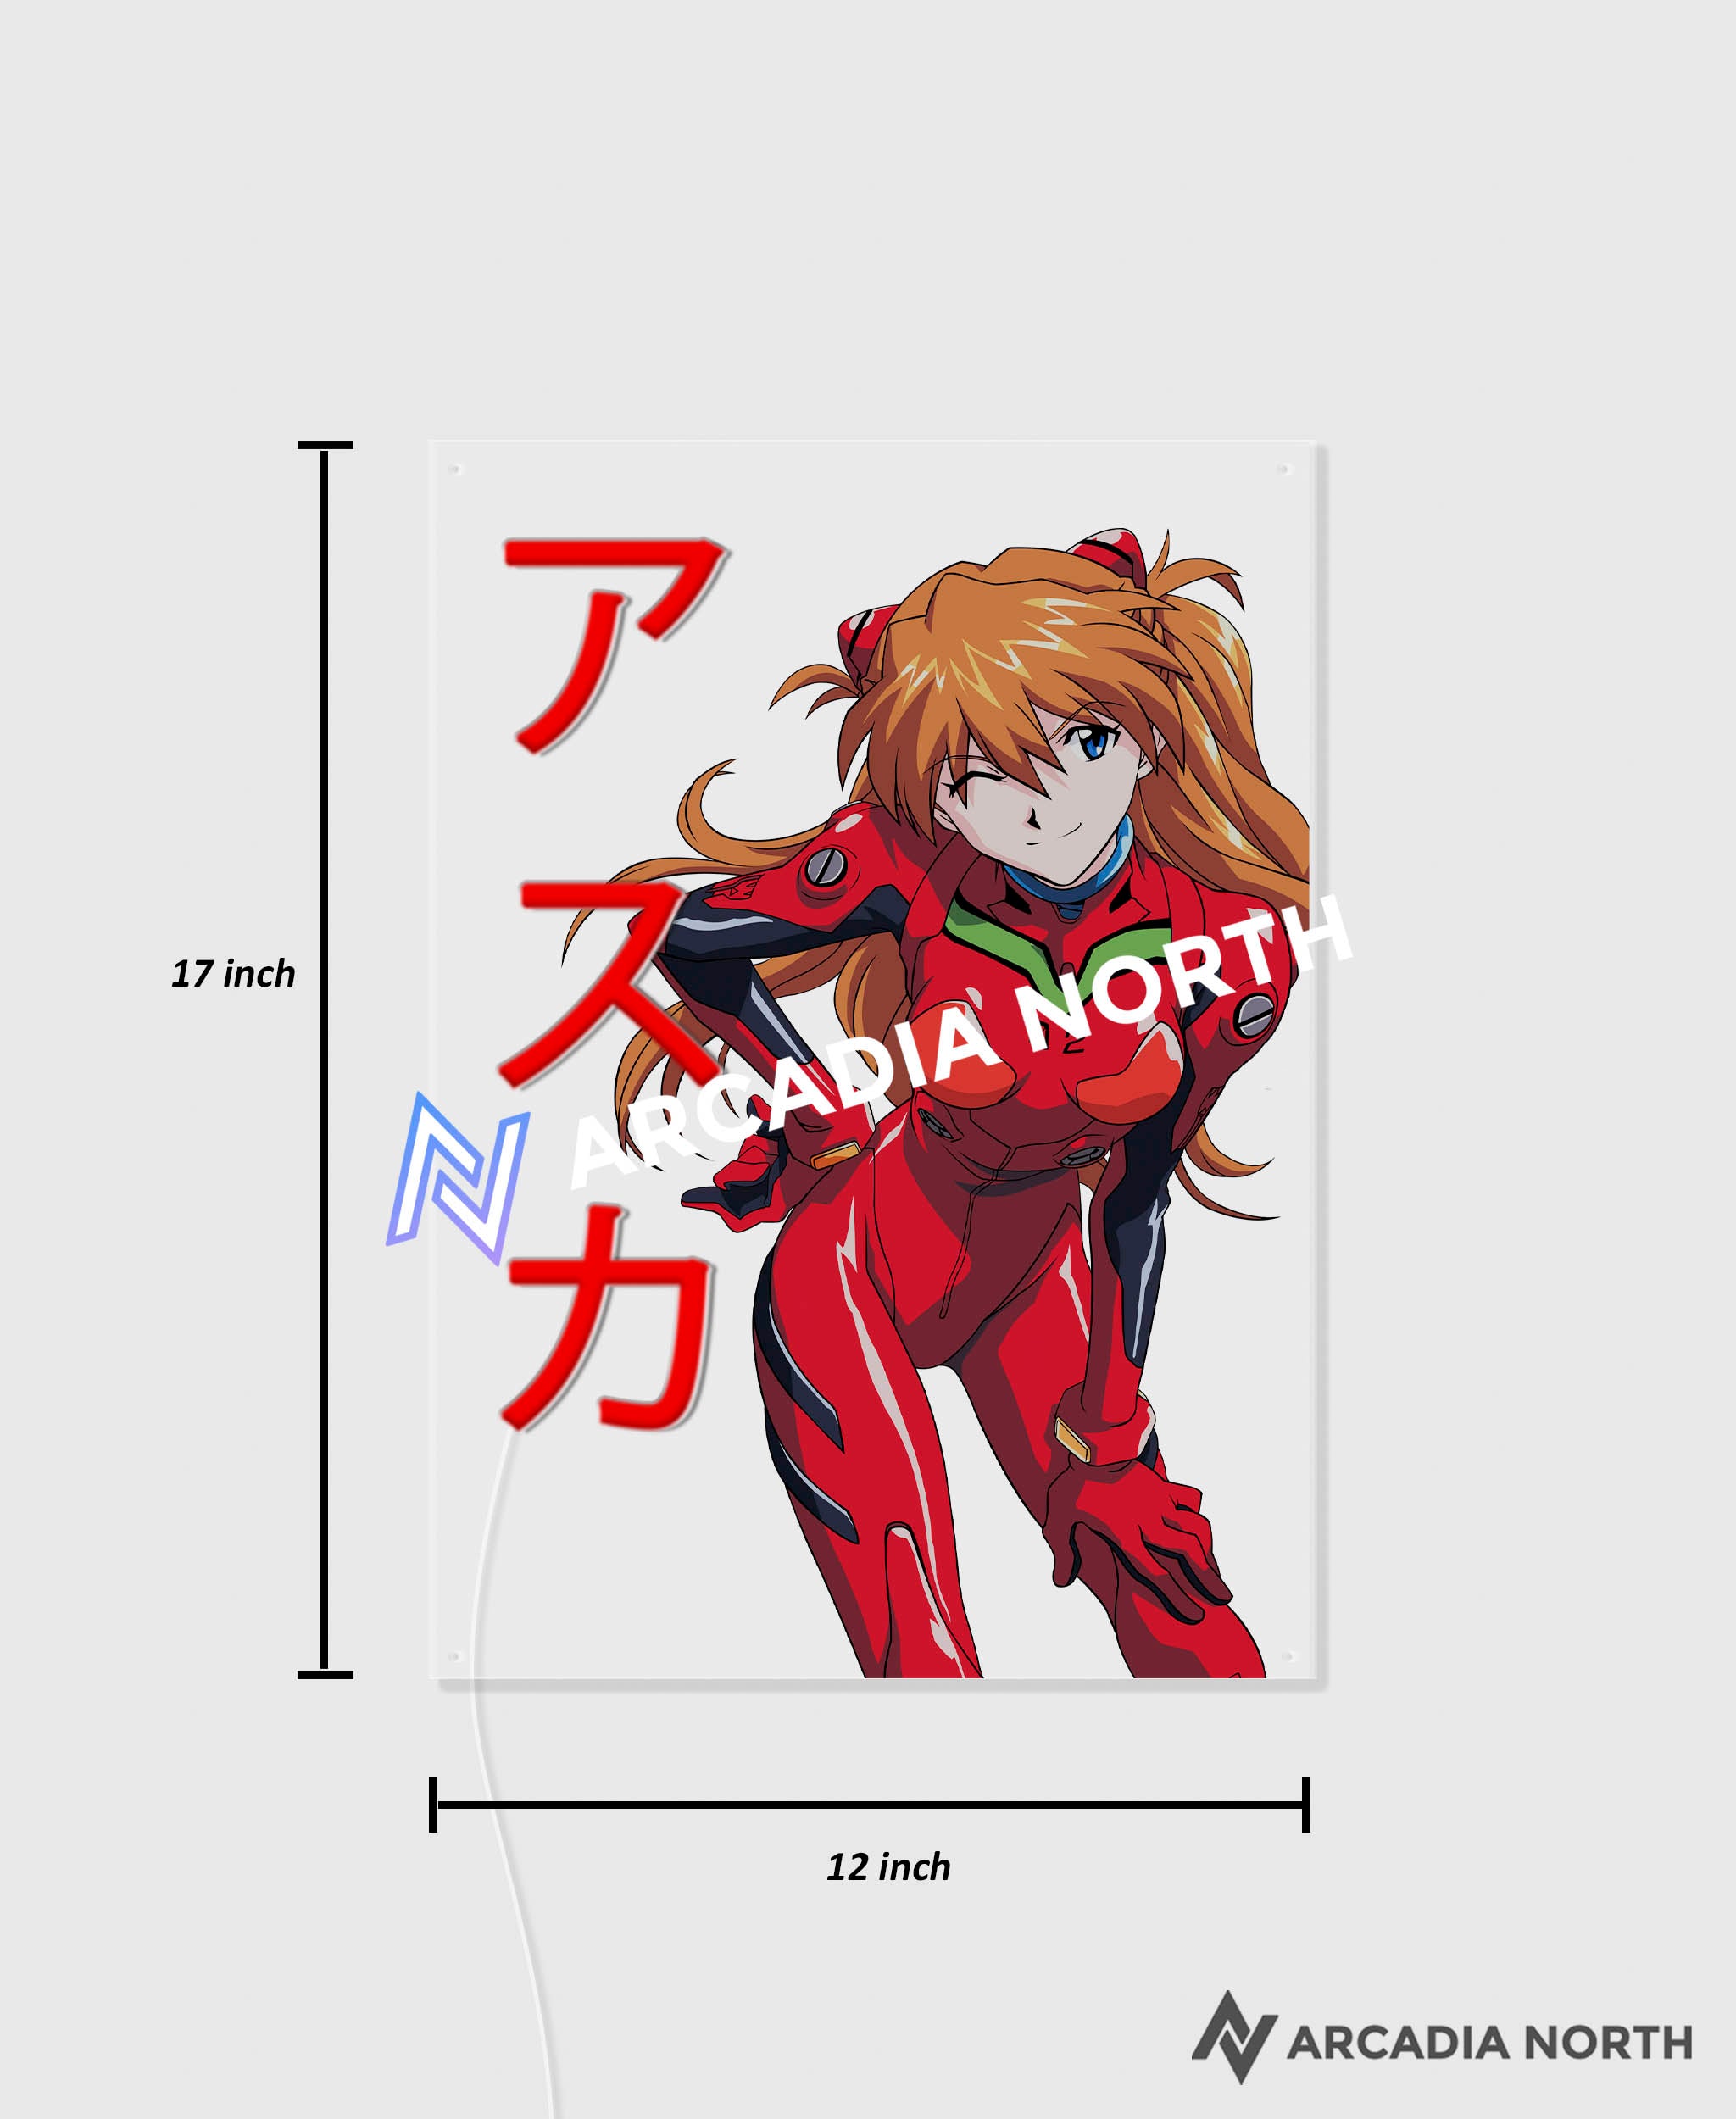 Arcadia North AURALIGHT Original LED Poster featuring the anime Neon Genesis Evangelion with Asuka Langley Soryu and her name Asuka written in Japanese Katakana. Illuminated by glowing neon LED lights. UV-printed on acrylic.